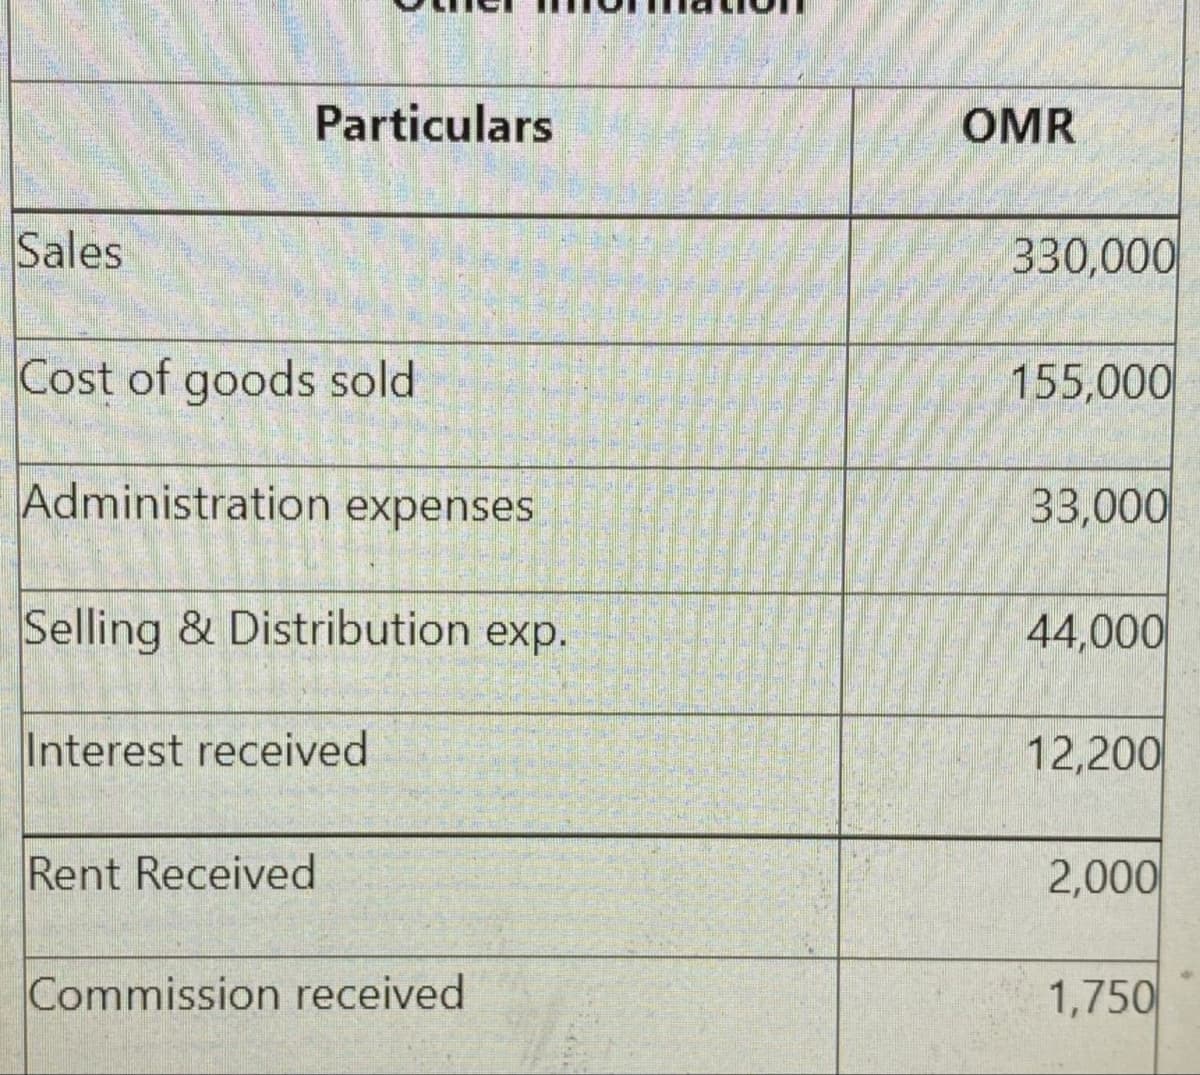 Particulars
OMR
Sales
330,000
Cost of goods sold
155,000
Administration expenses
33,000
Selling & Distribution exp.
44,000
Interest received
12,200
Rent Received
2,000
Commission received
1,750
